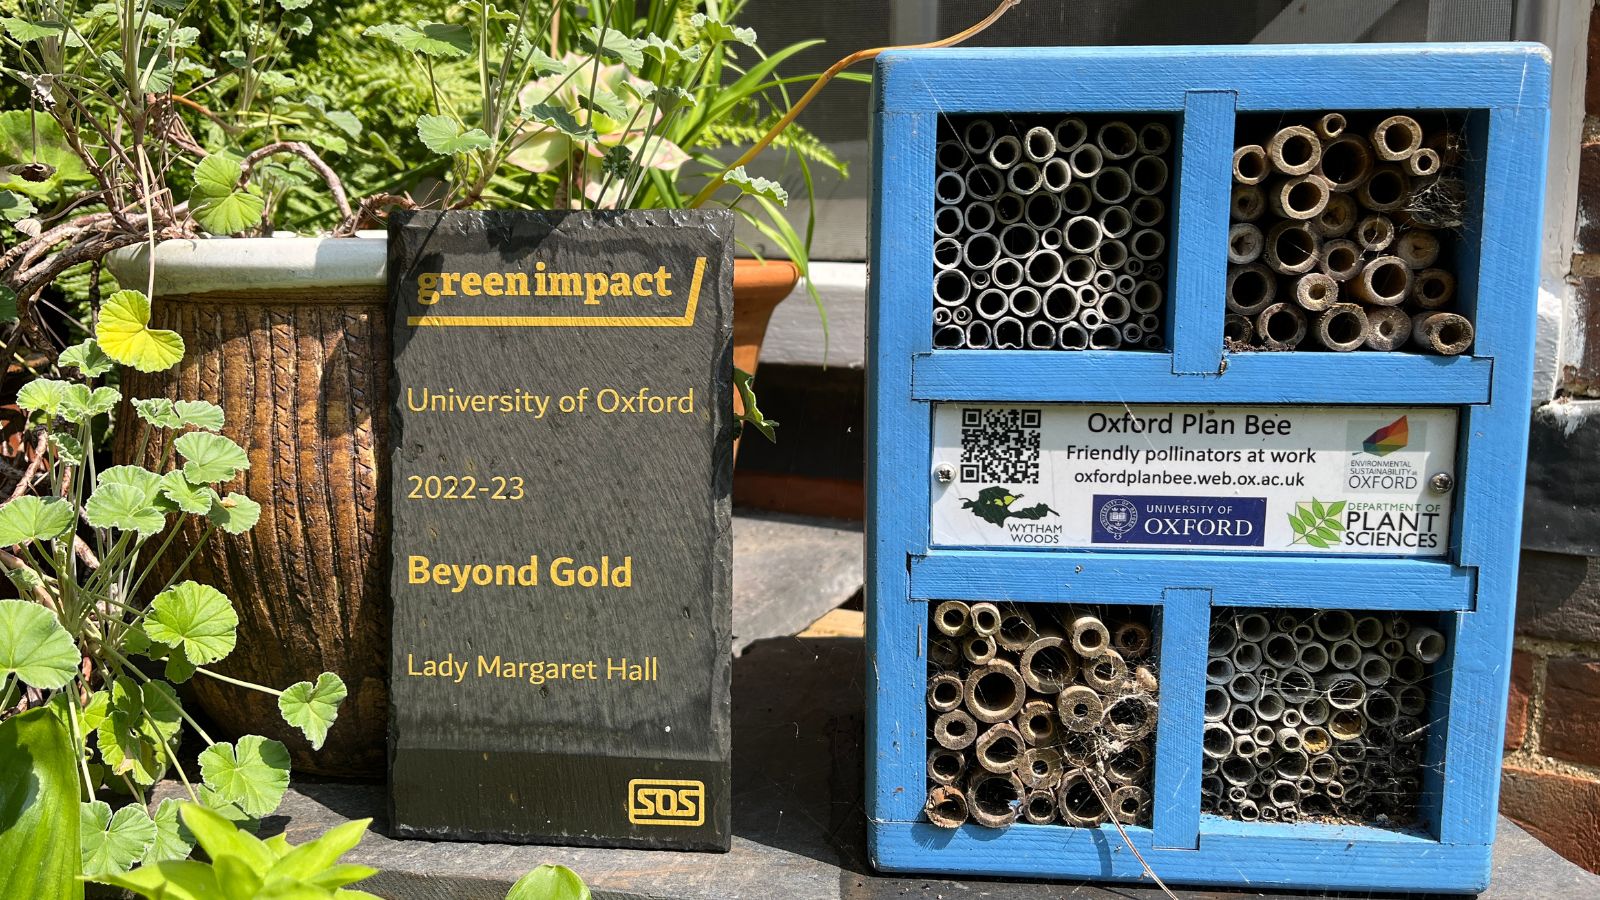 Photo of a Green Impact Beyond Gold Award awarded to LMH, sitting amongst pots of plants and next to a blue bee hotel